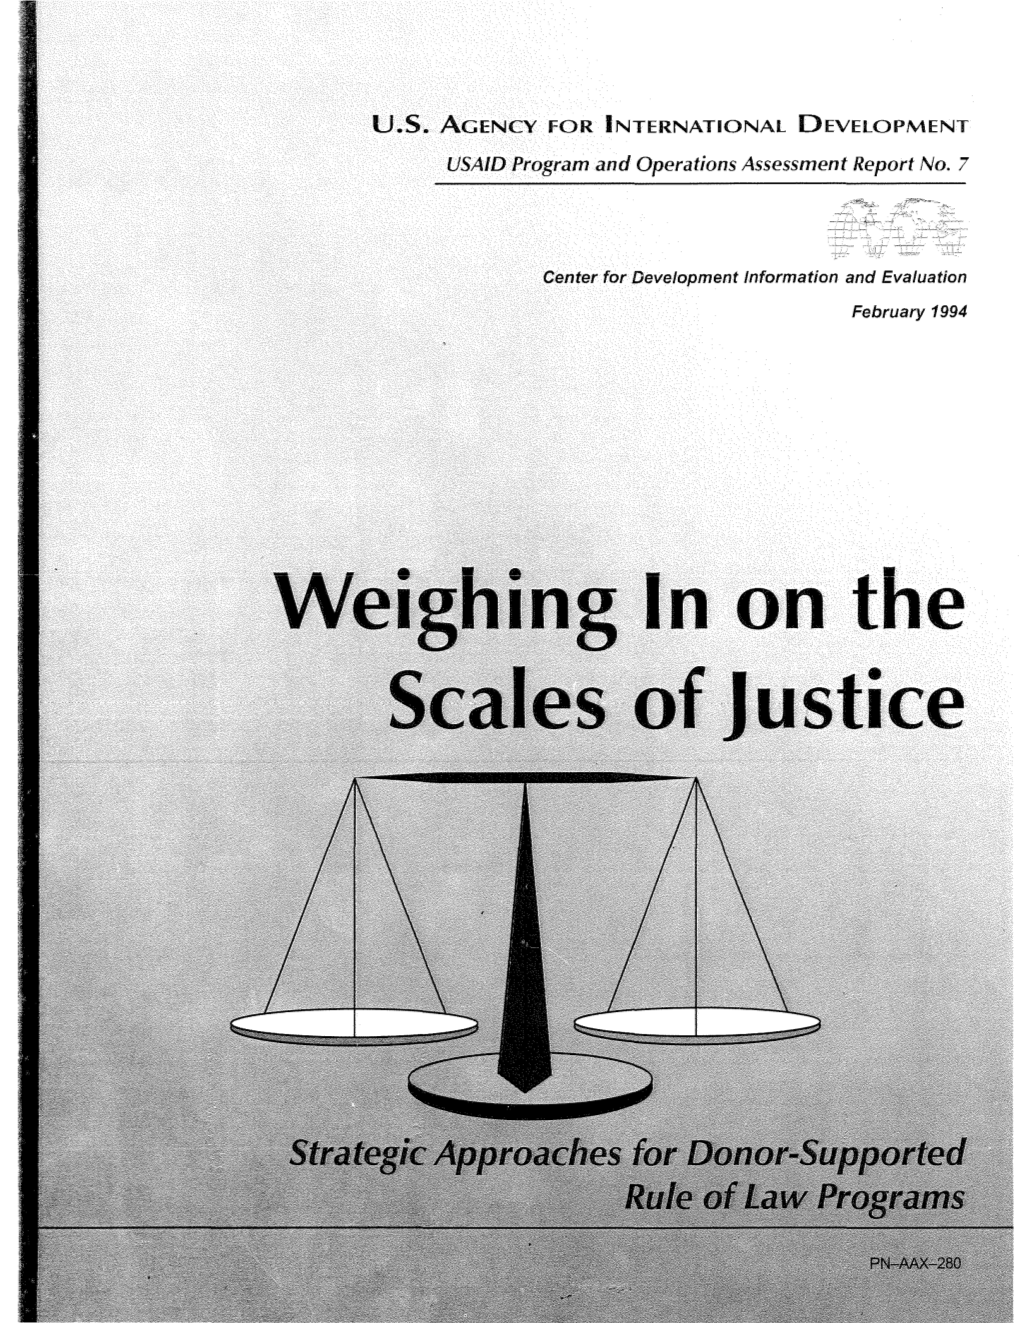 Strategic Approaches for Donor-Supported Rule of Law